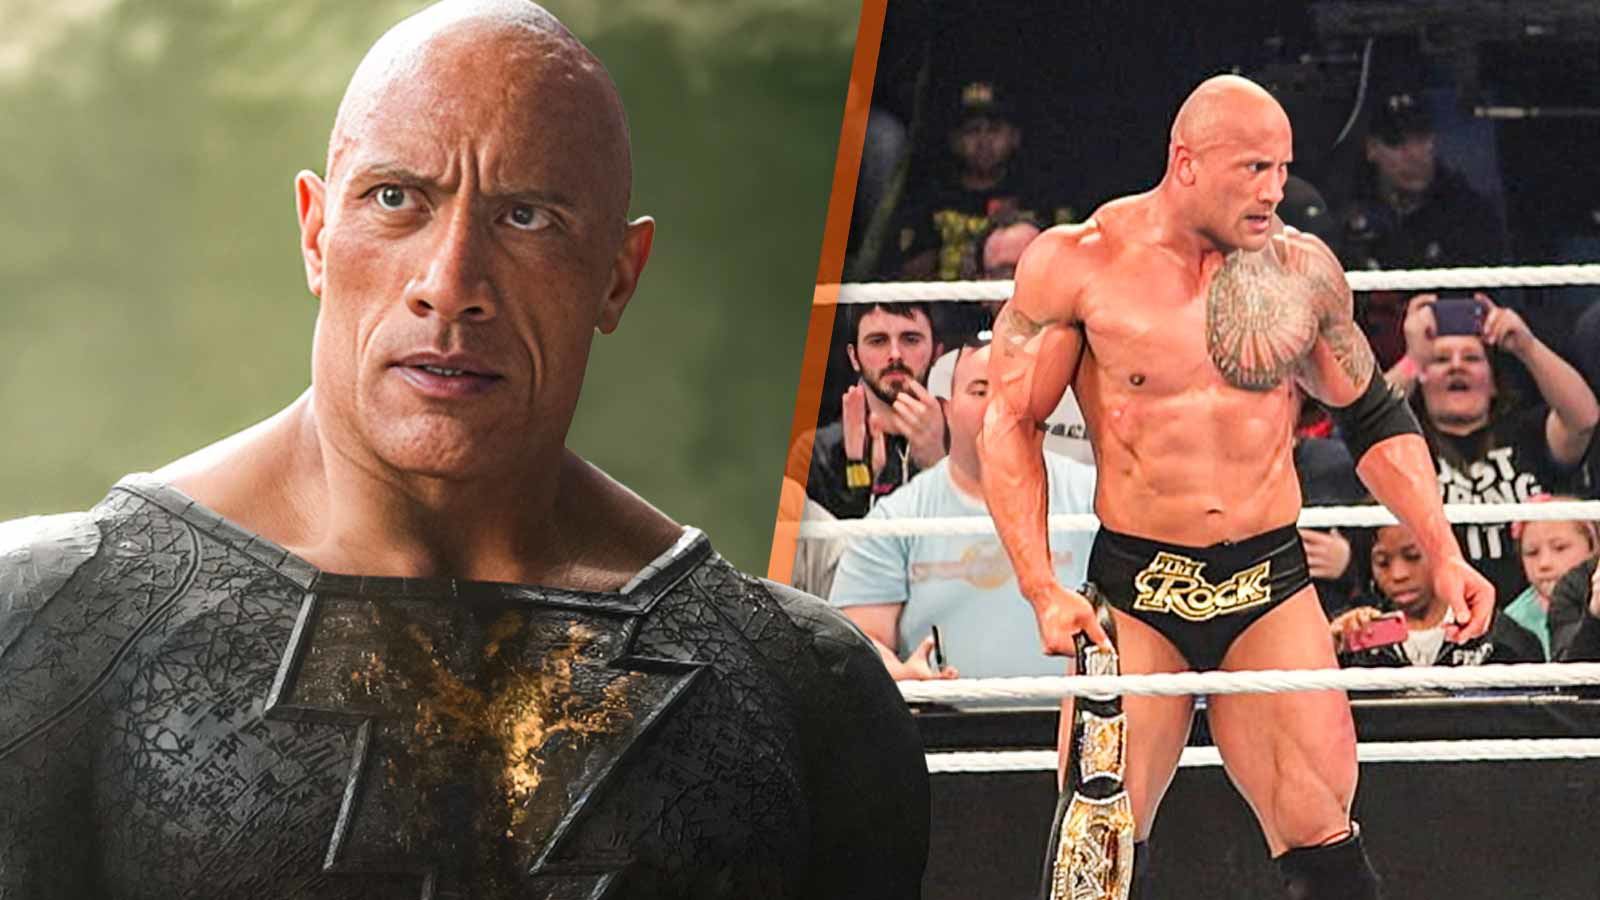 “The Rock thanks you for that”: Dwayne Johnson’s Former Rival Saved Him From a Humiliating Spot Infront of a Rowdy WWE Crowd